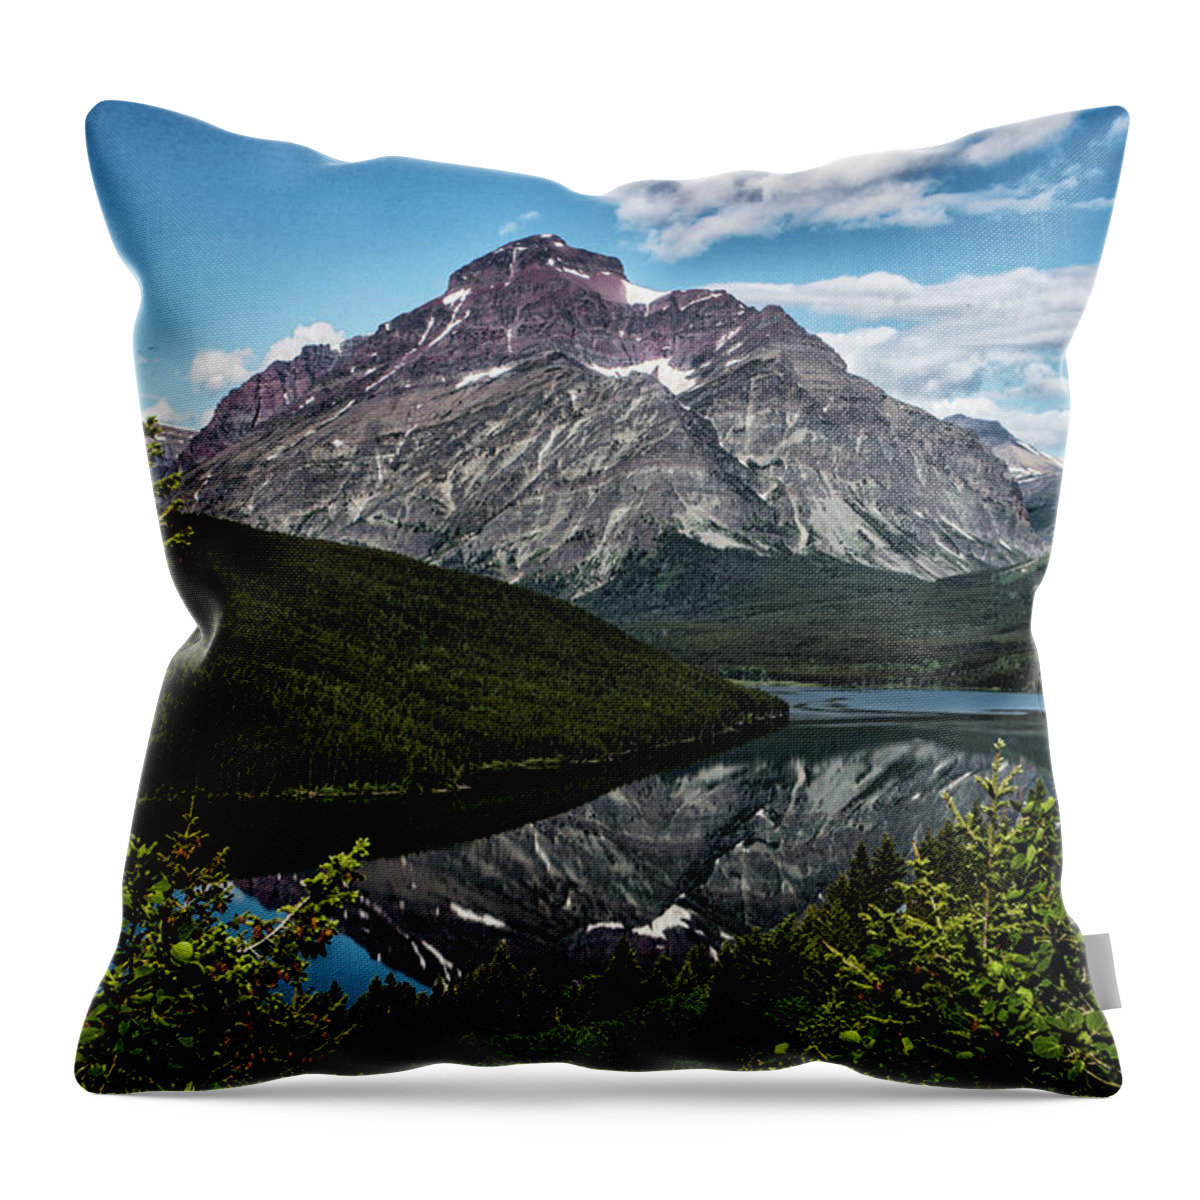 Montana Throw Pillow featuring the photograph Reflected Beauty - Vertical by Kathy McClure